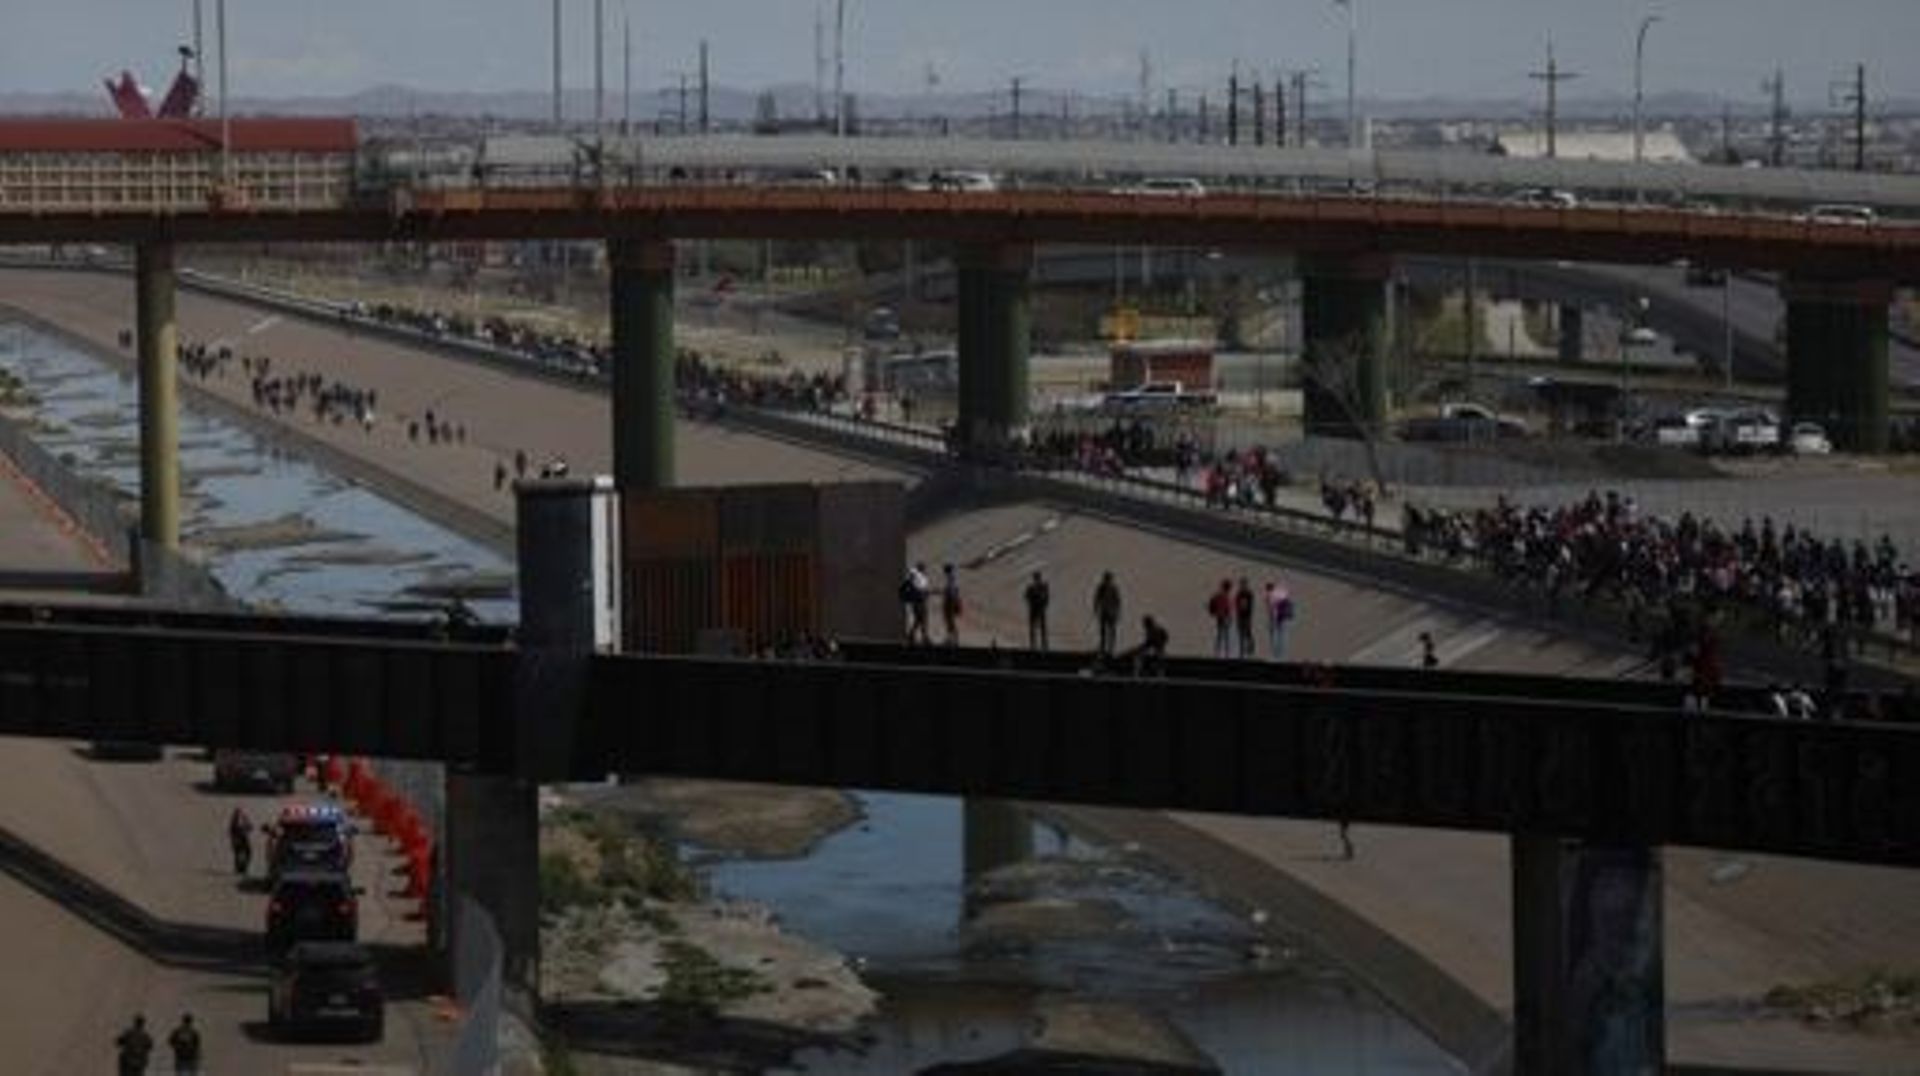 Migrants, mostly of Venezuelan origin, attempt to forcibly cross into the United States at the Paso del Norte International Bridge in Ciudad Juarez, Chihuahua state, Mexico, on March 12, 2023. Hundreds of migrants, mostly Venezuelans, attempted to stamped